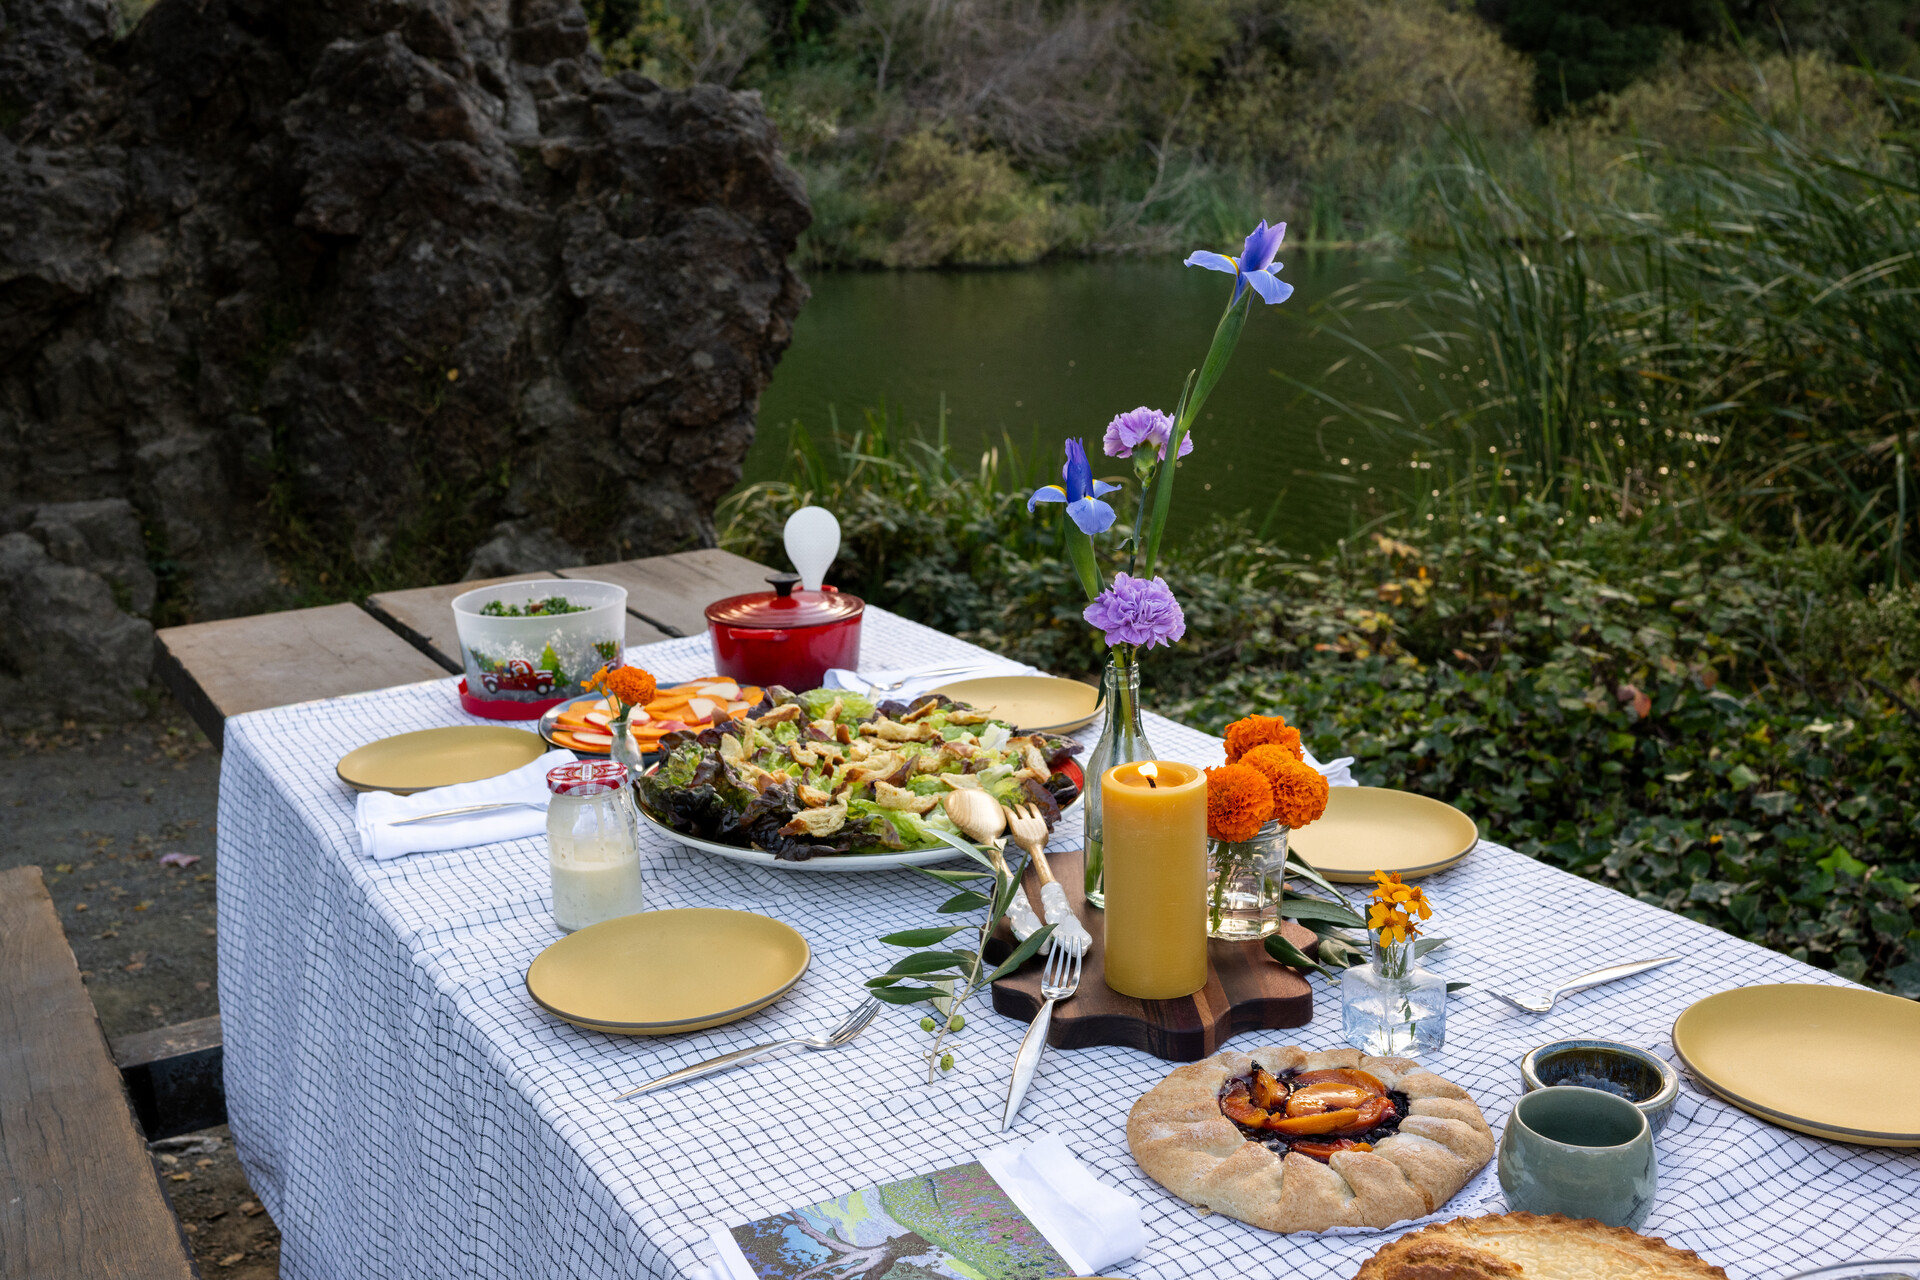 A colorful outdoor table setting with a black-and-white checkered tablecloth, candles and fresh flowers — plus a fruit galette and big platter of salad.